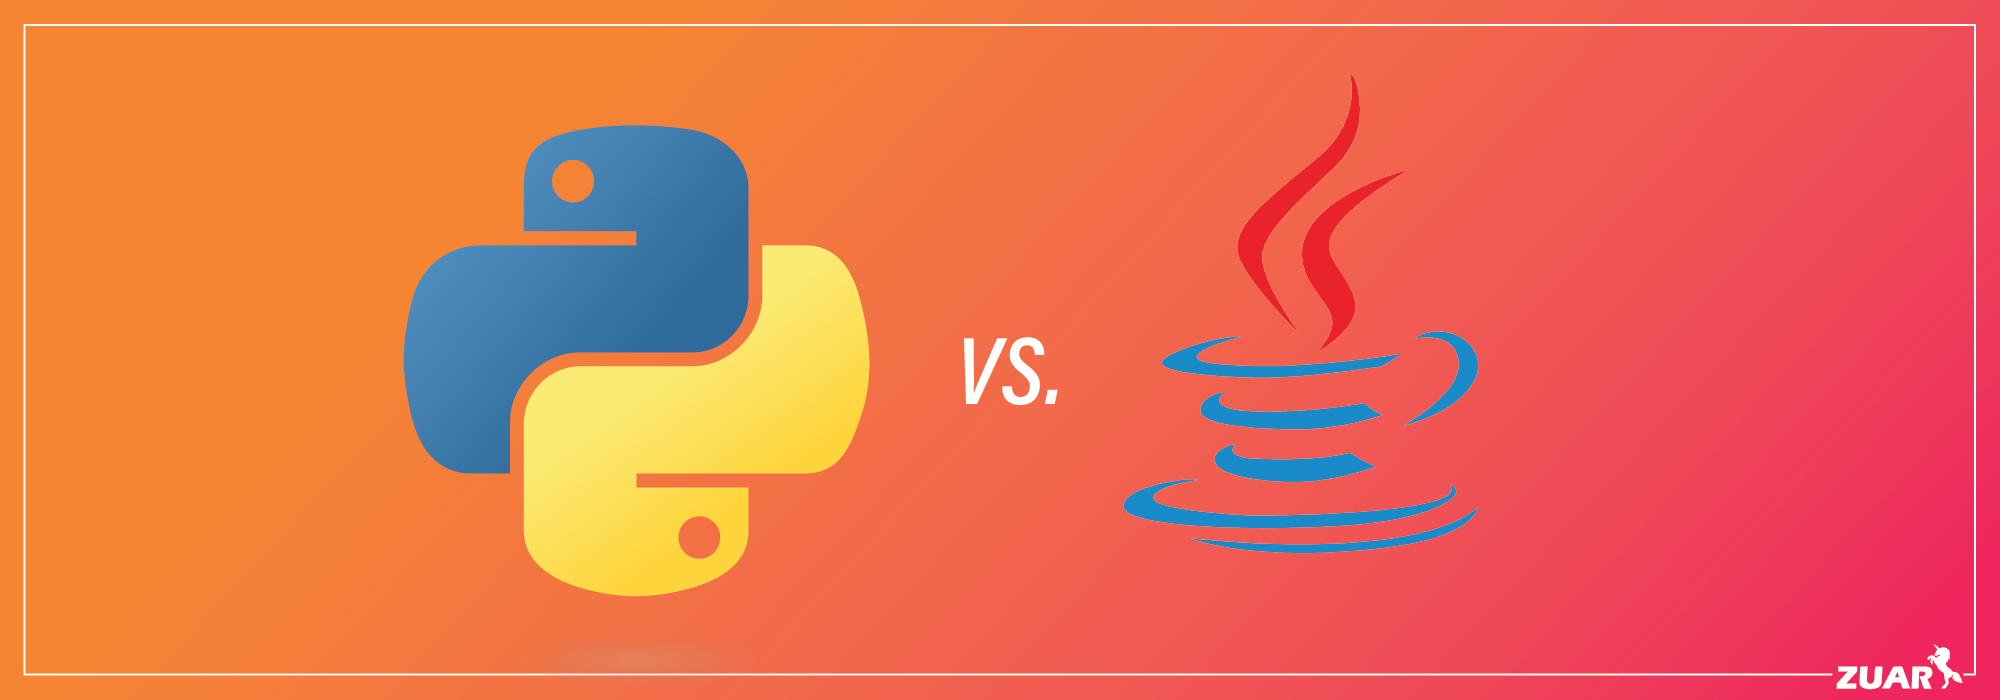 Differences between Python vs Java: speed, uses, performance, etc.